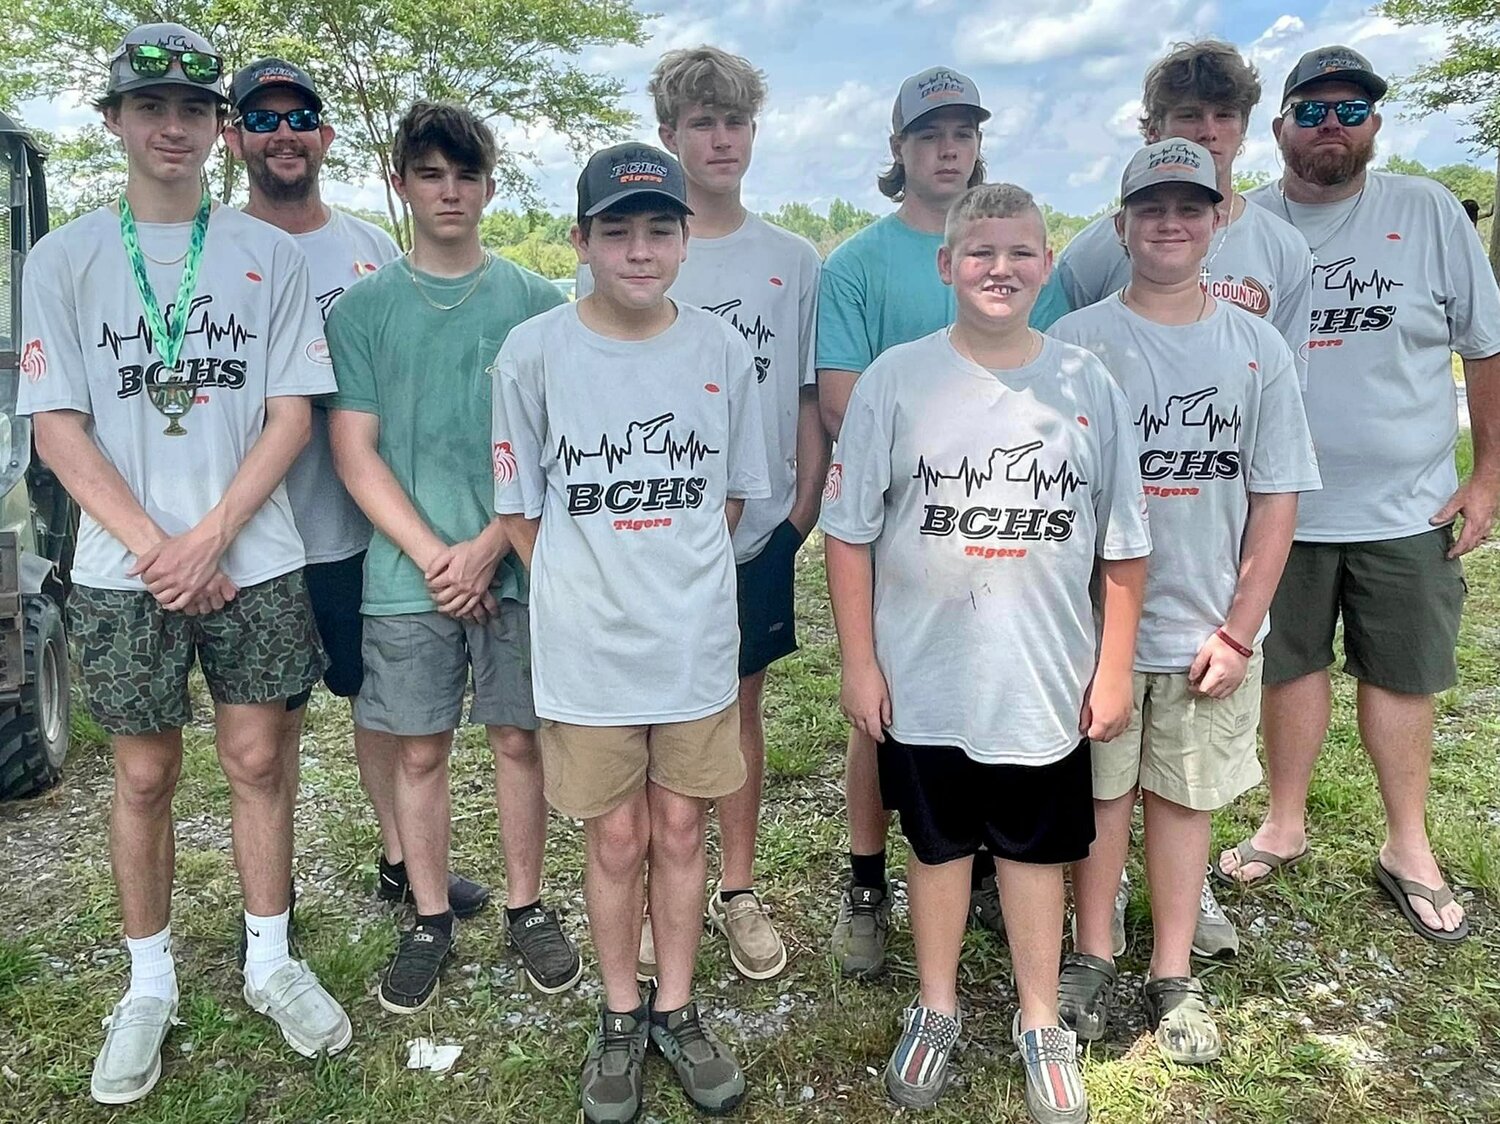 Baldwin County High School Sporting Clays recently competed in the Trap Shoot Finals, hosted by Emmanuel Christian School. The competition took place at Dixie Trap & Gun Club in Matthews.